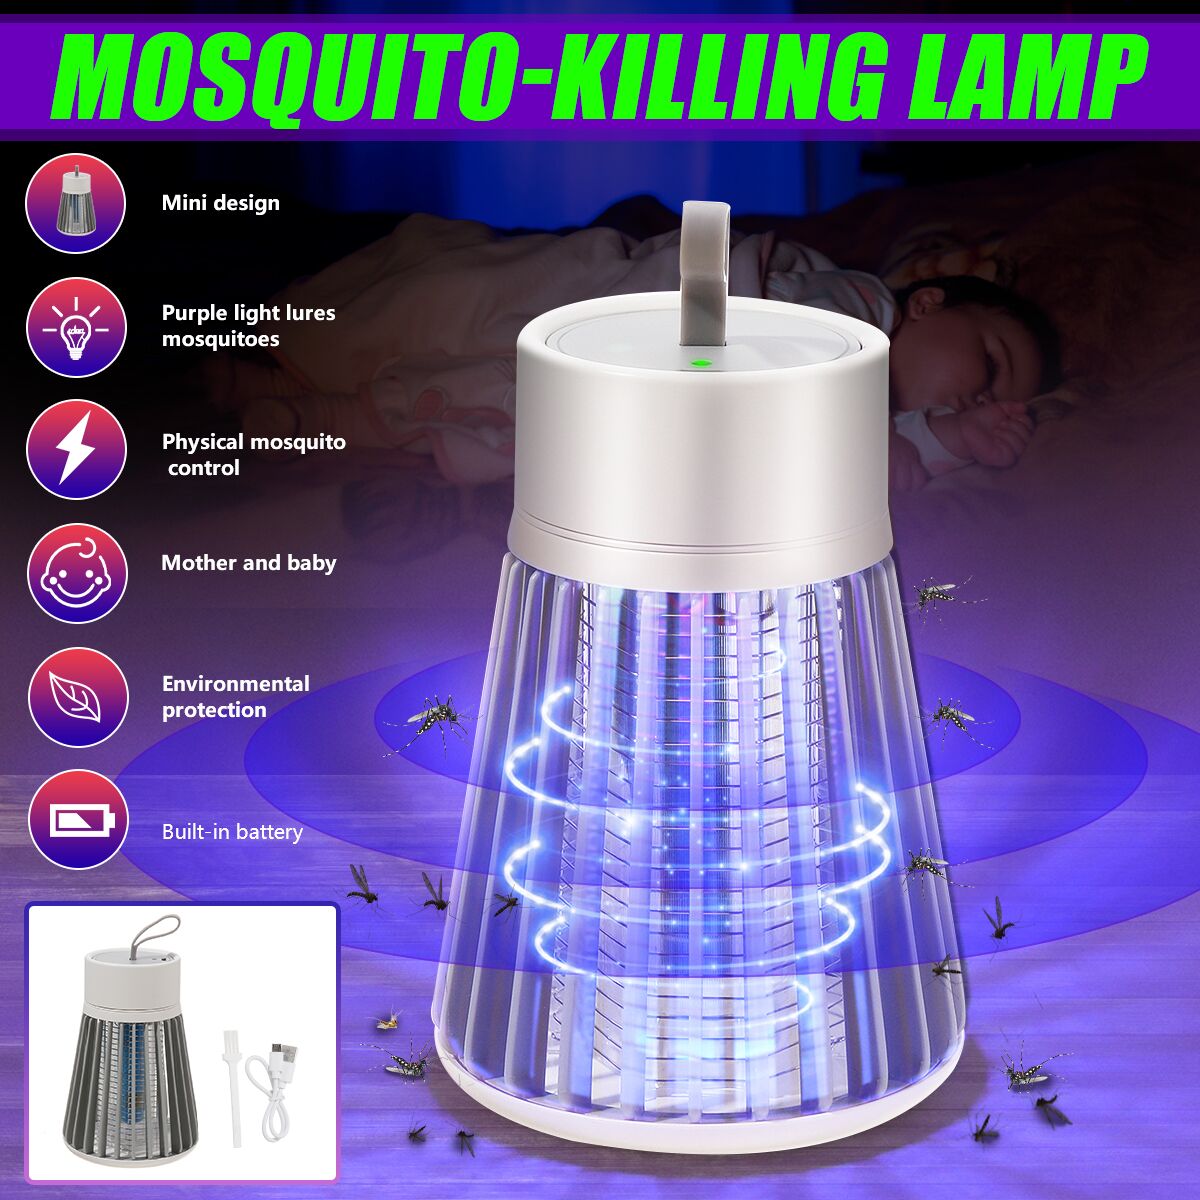 Rechargeable-Insect-Killer-Lamp-Low-Noise-Mosquito-Repellent-Trap-Light-Physical-Mosquito-Dispeller-1676917-1